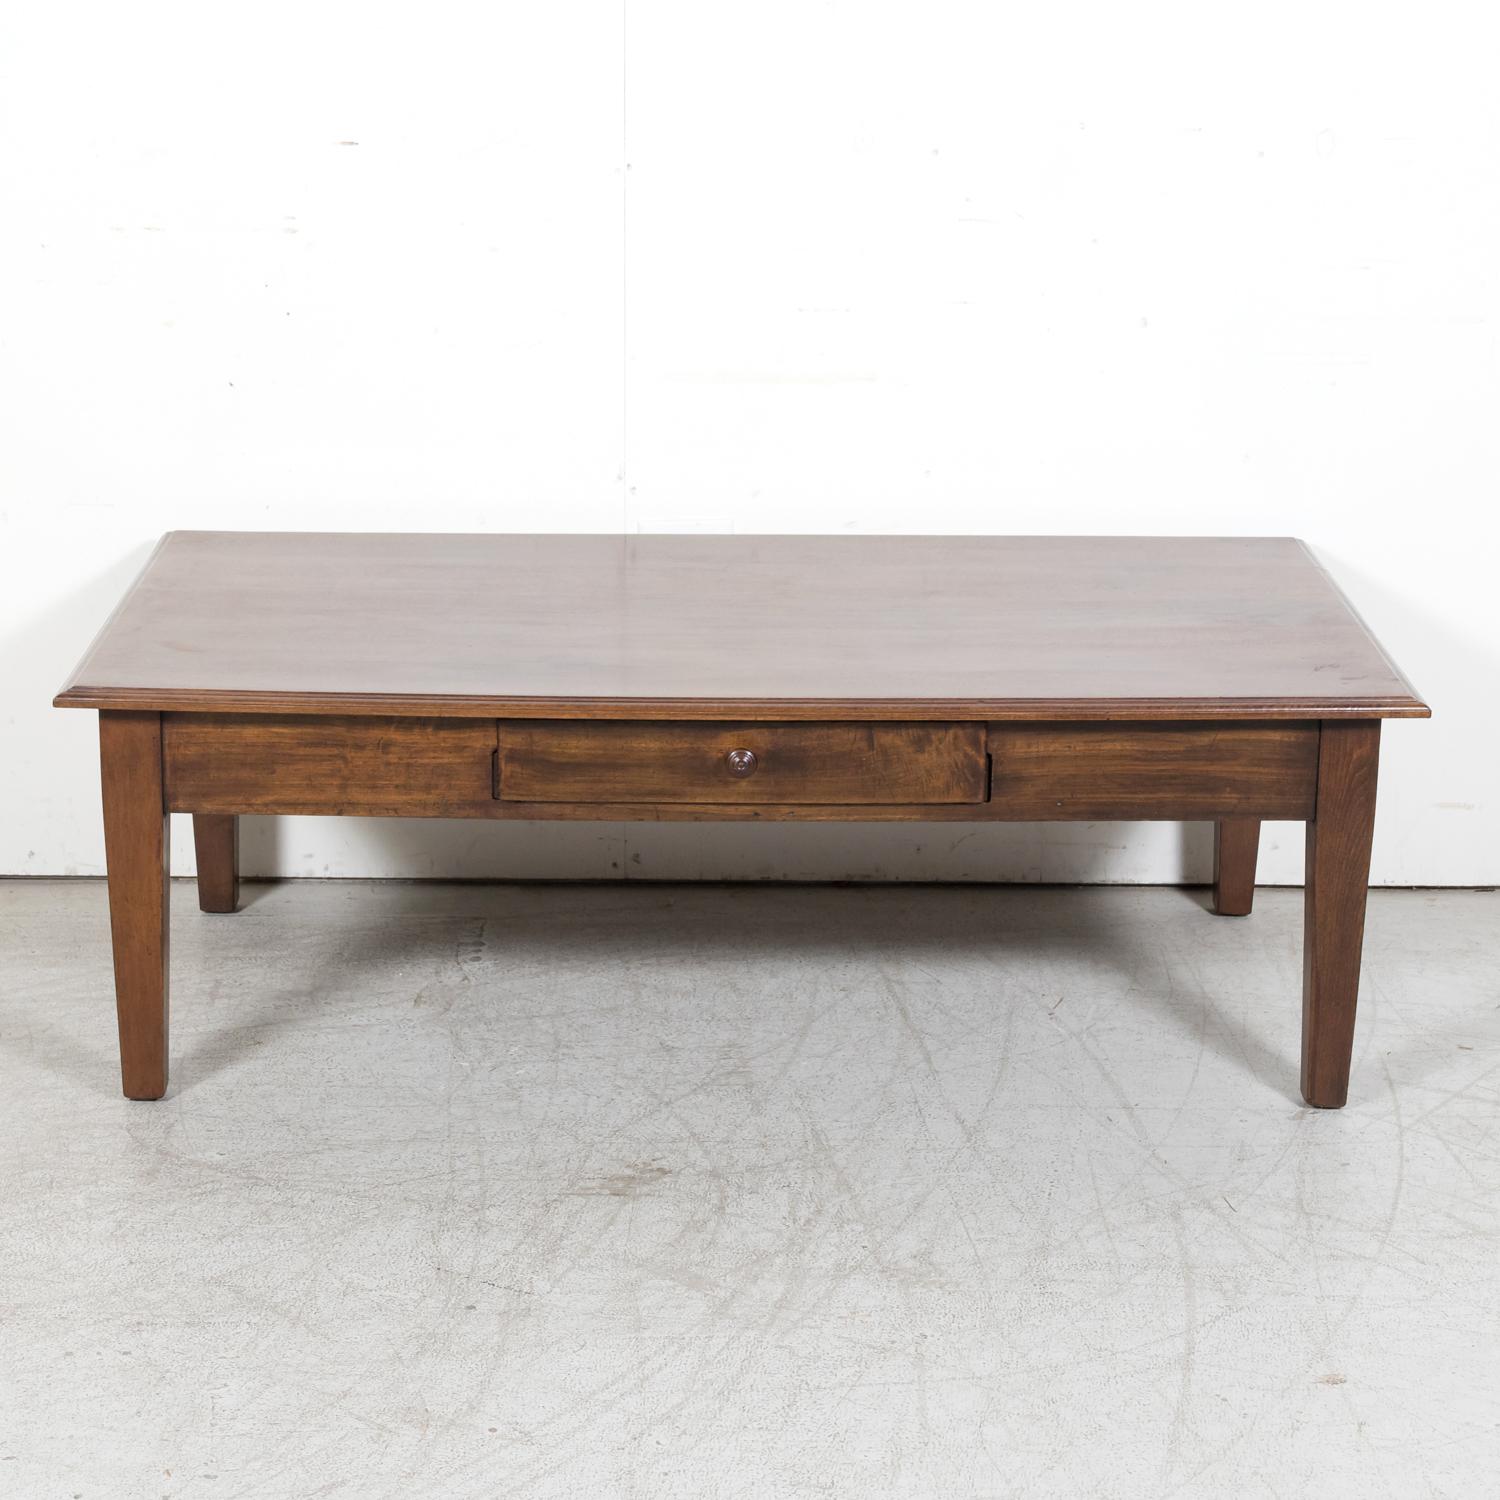 Late 19th Century Large 19th Century Rustic French Country Solid Walnut Coffee Table with Drawer For Sale